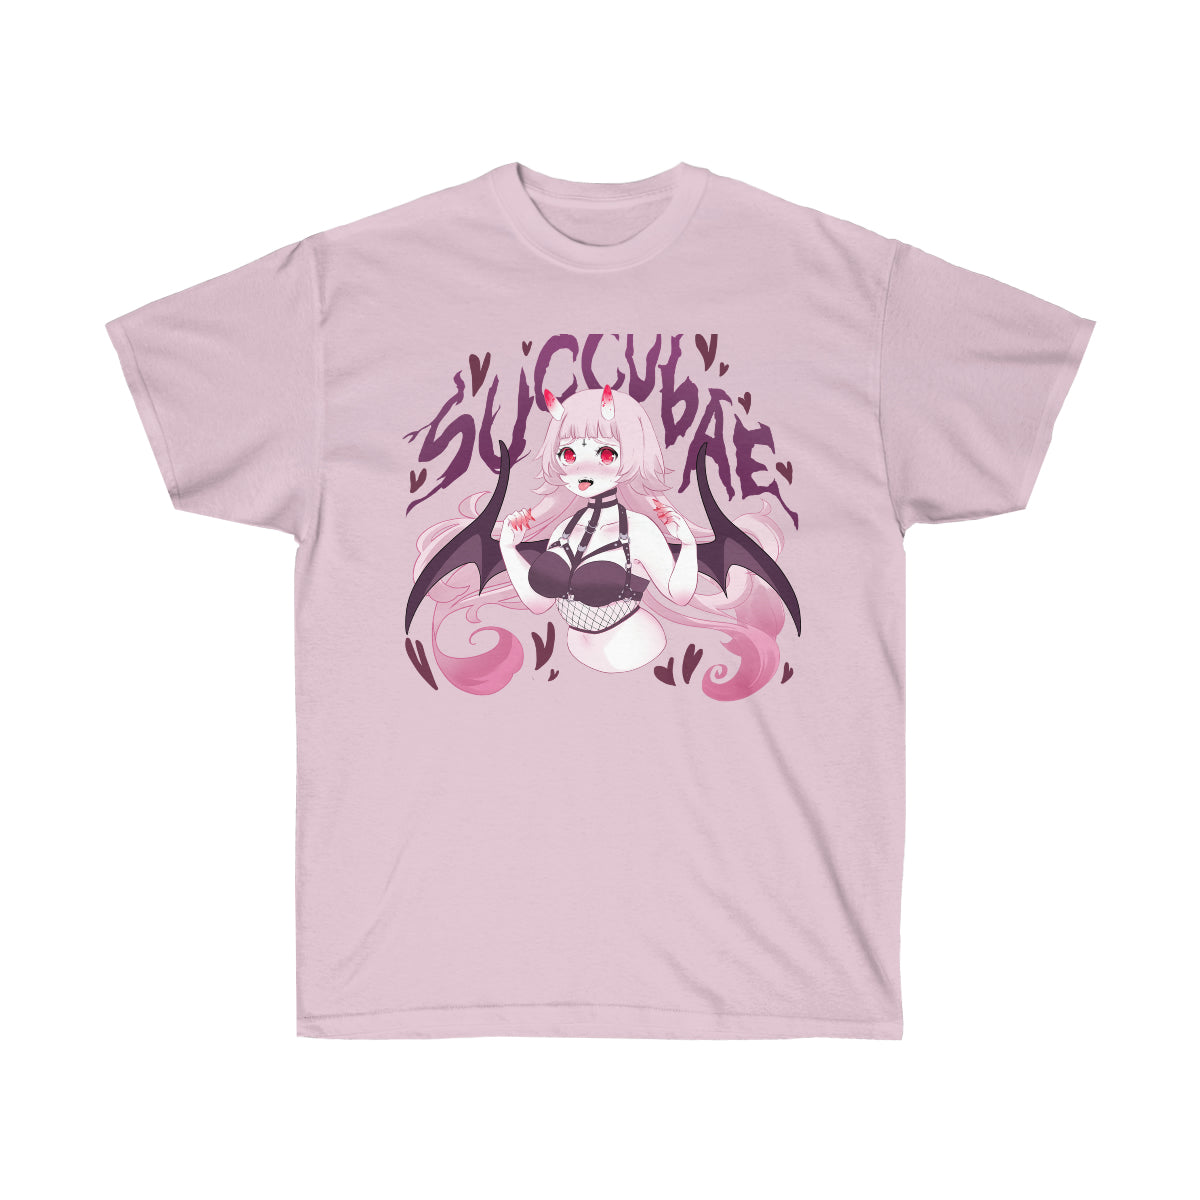 Succubae T-Shirt (Pink) by fawnbomb